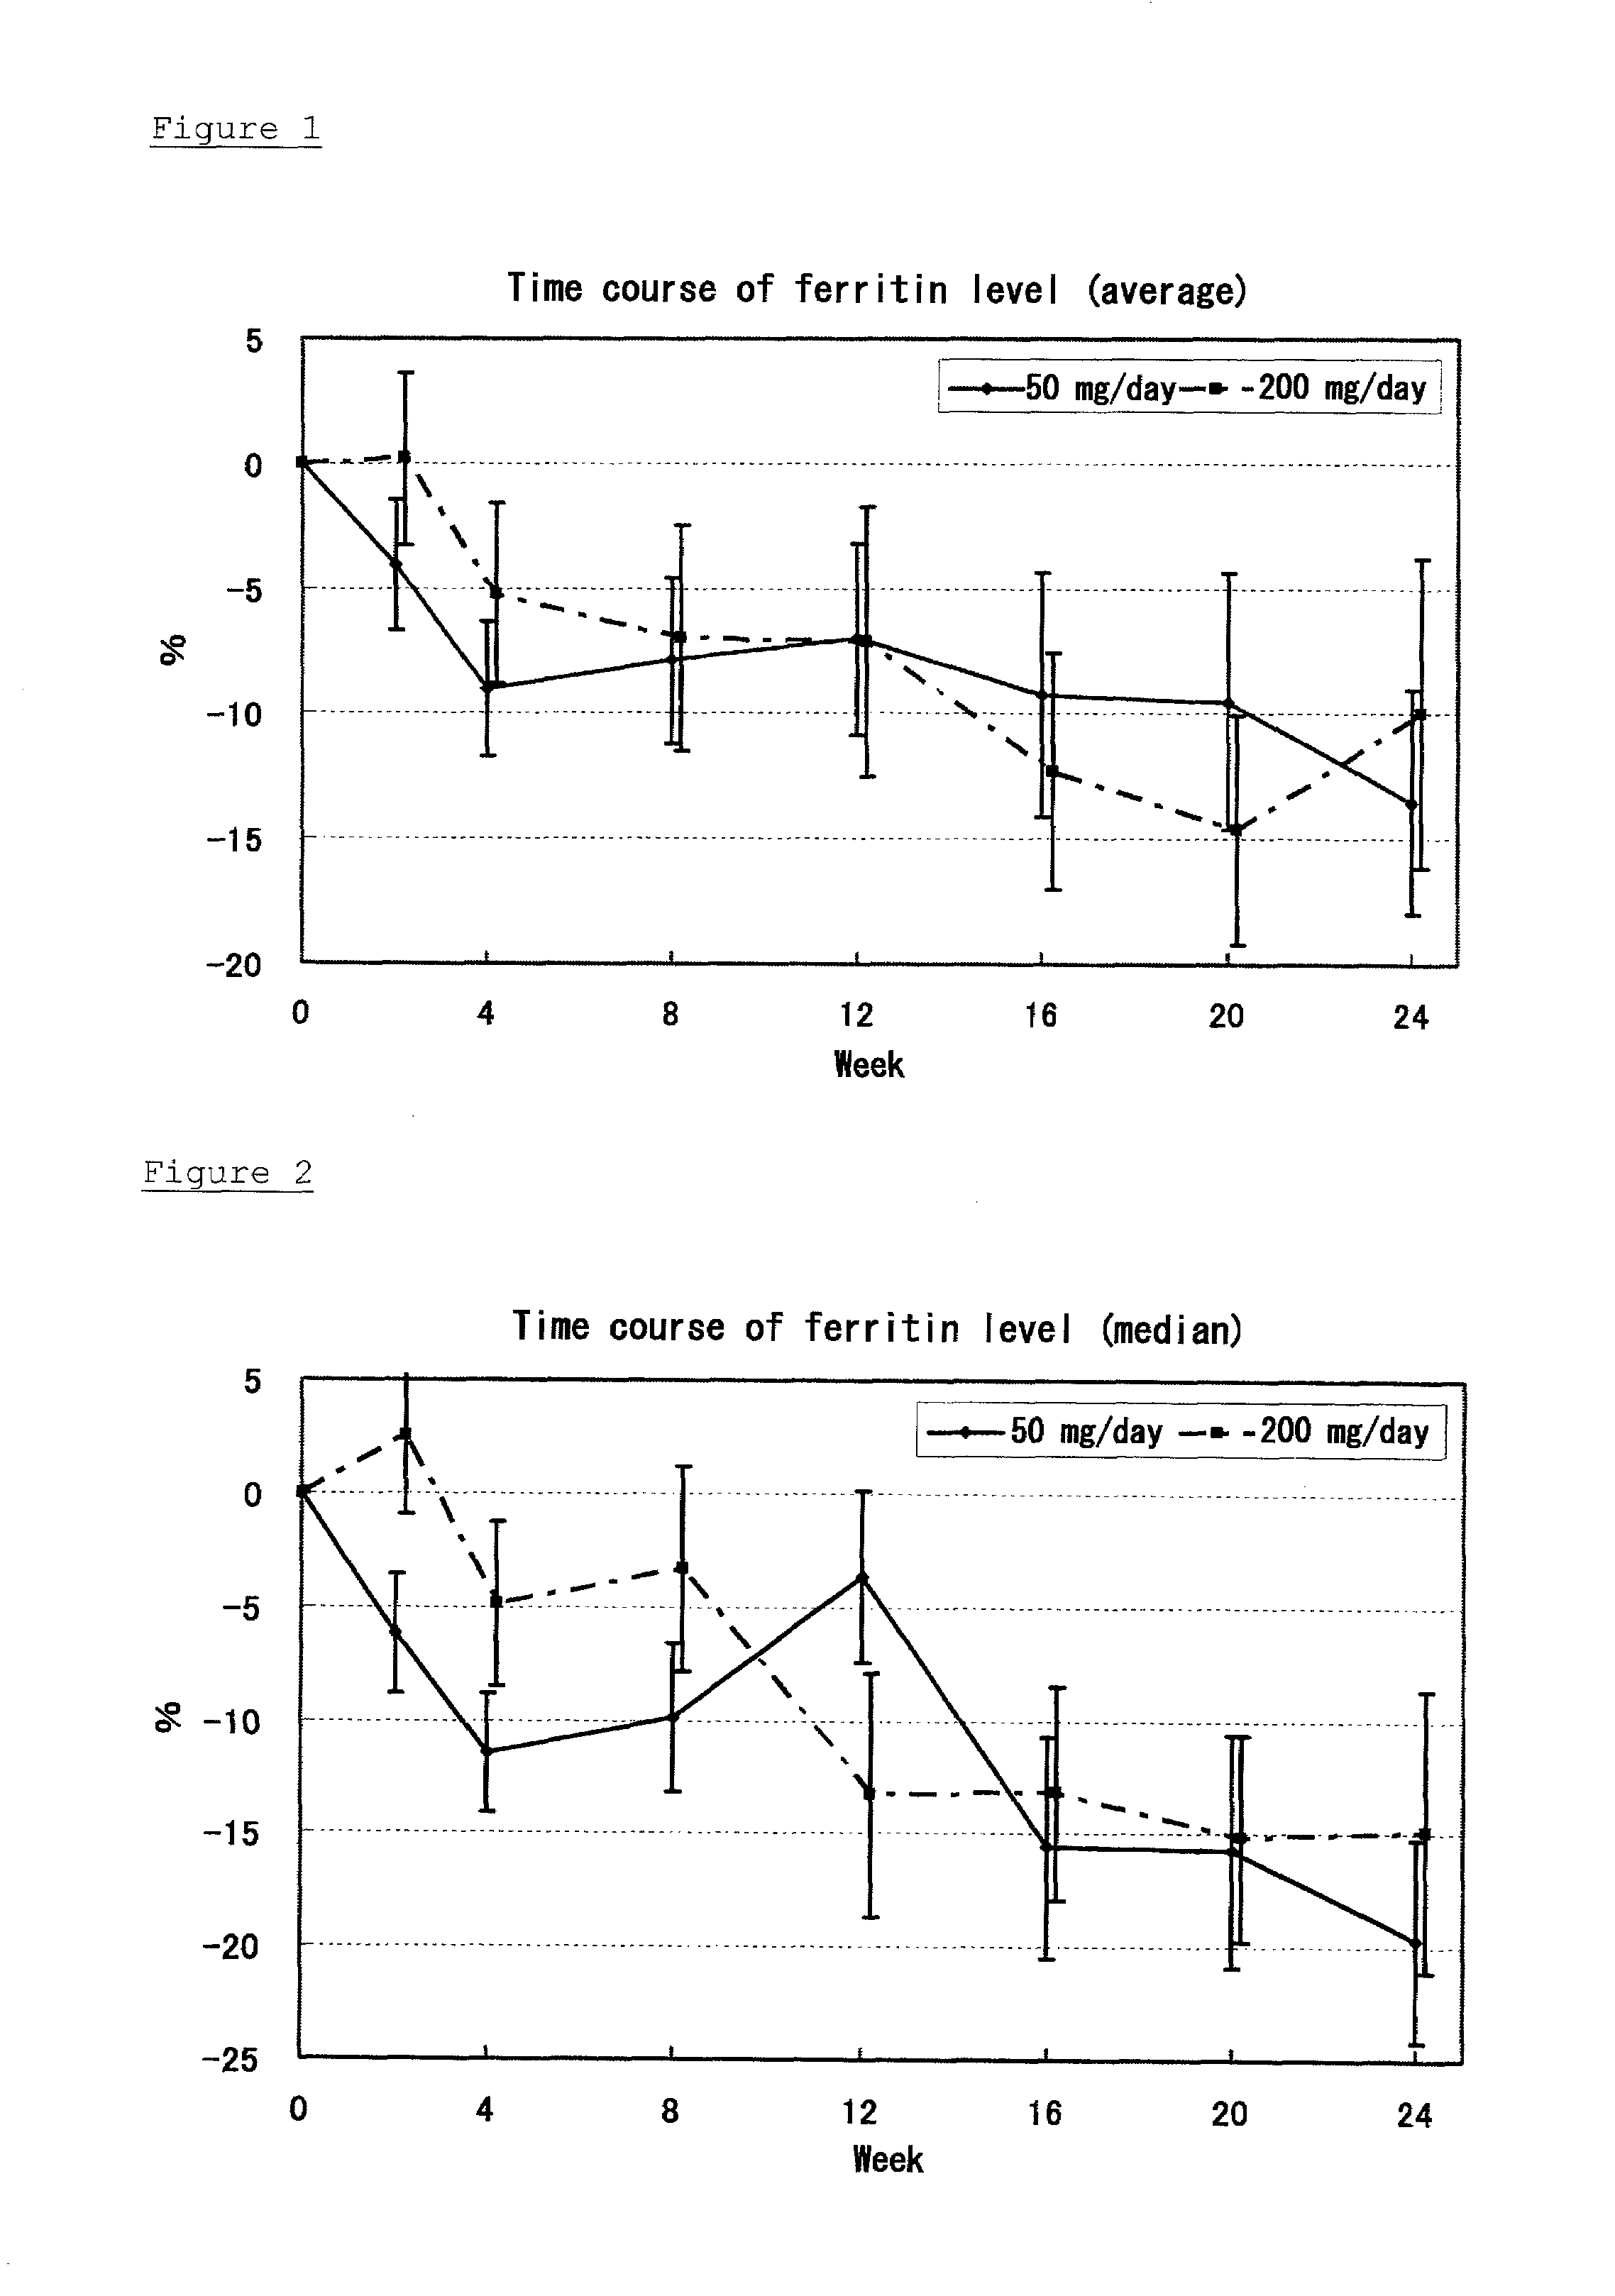 Agent for prevention or treatment of iron overload disorders